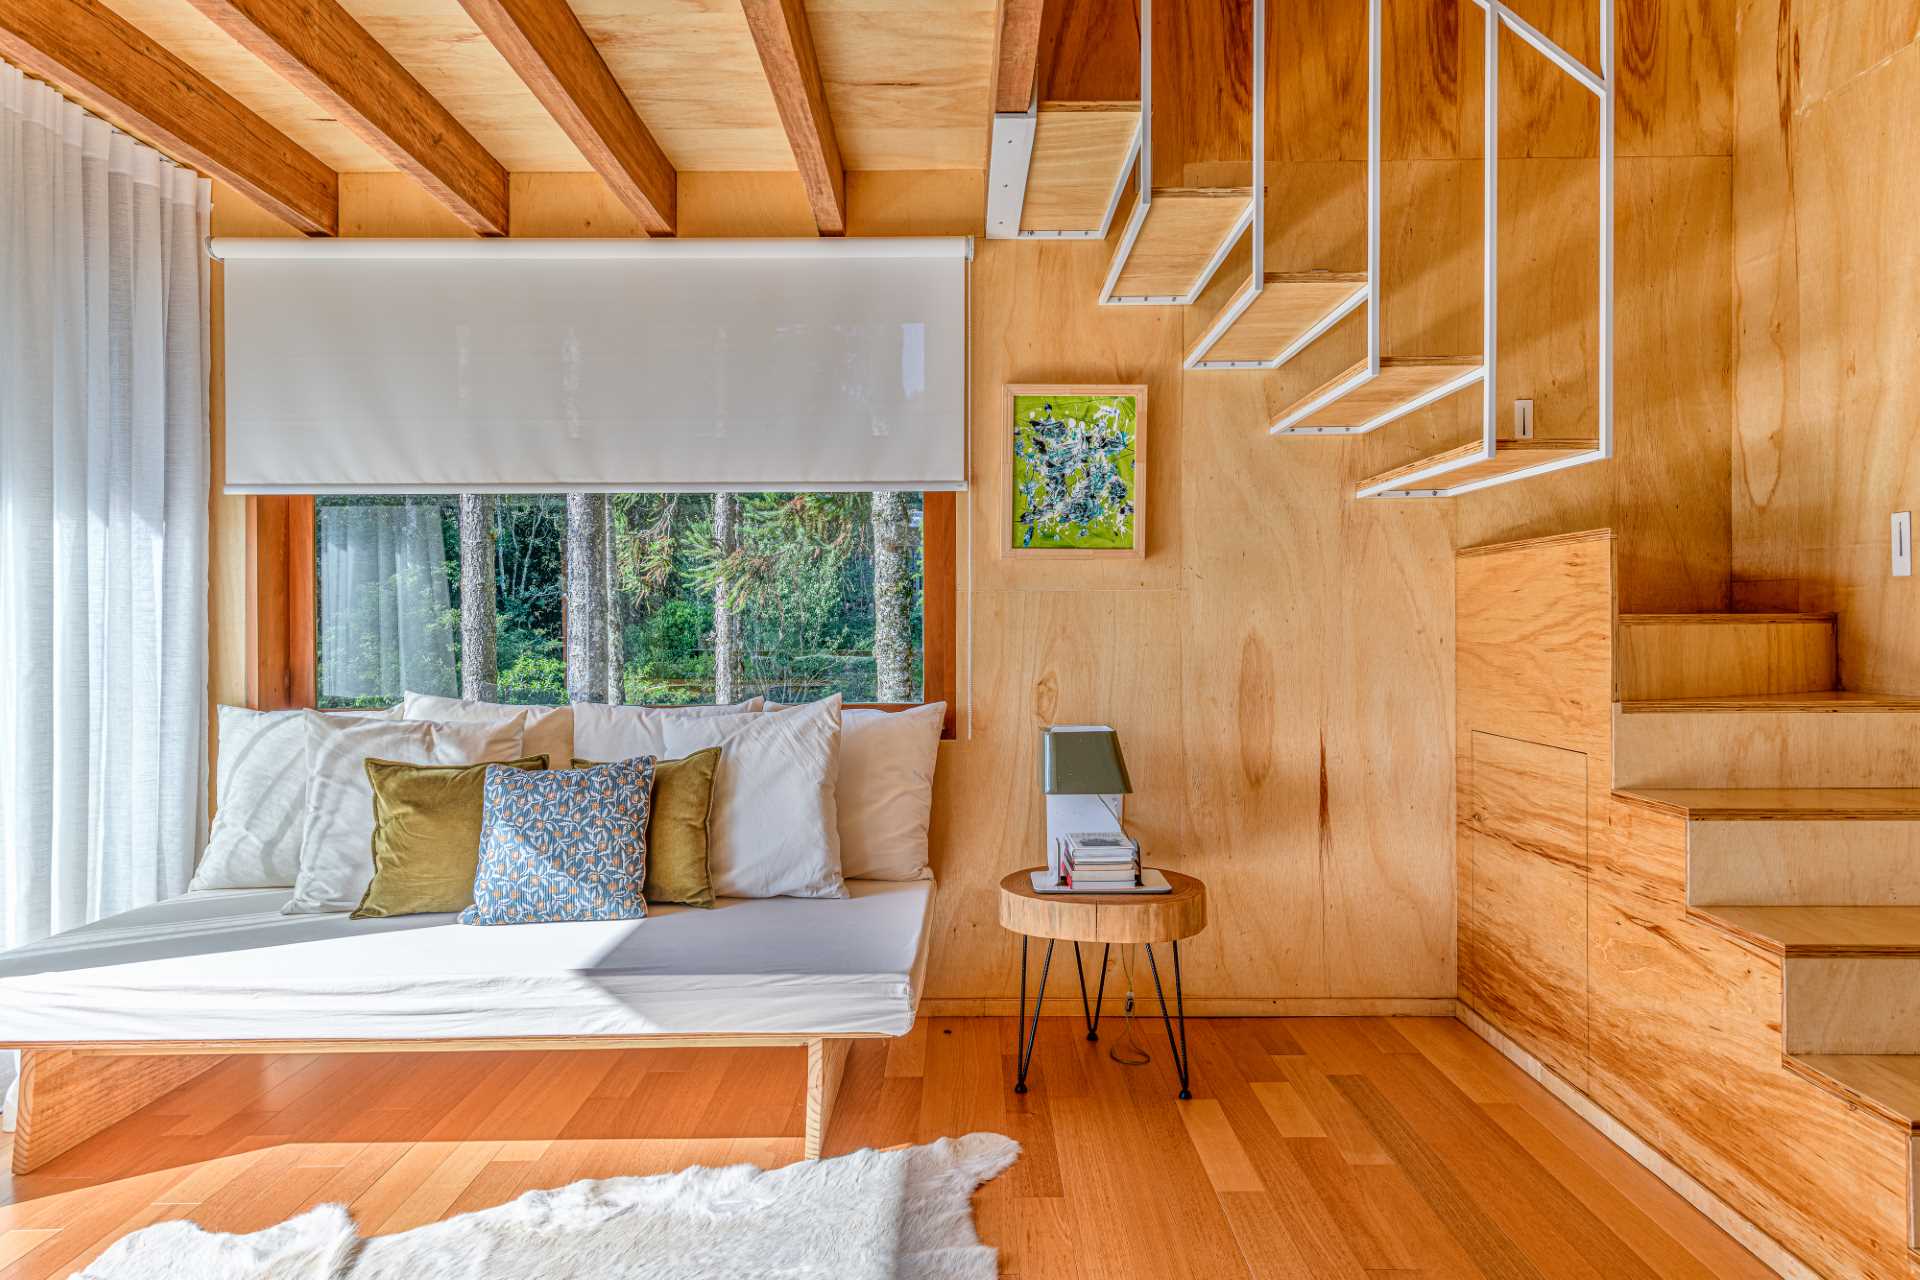 The living room of a small modern tree house in Brazil.